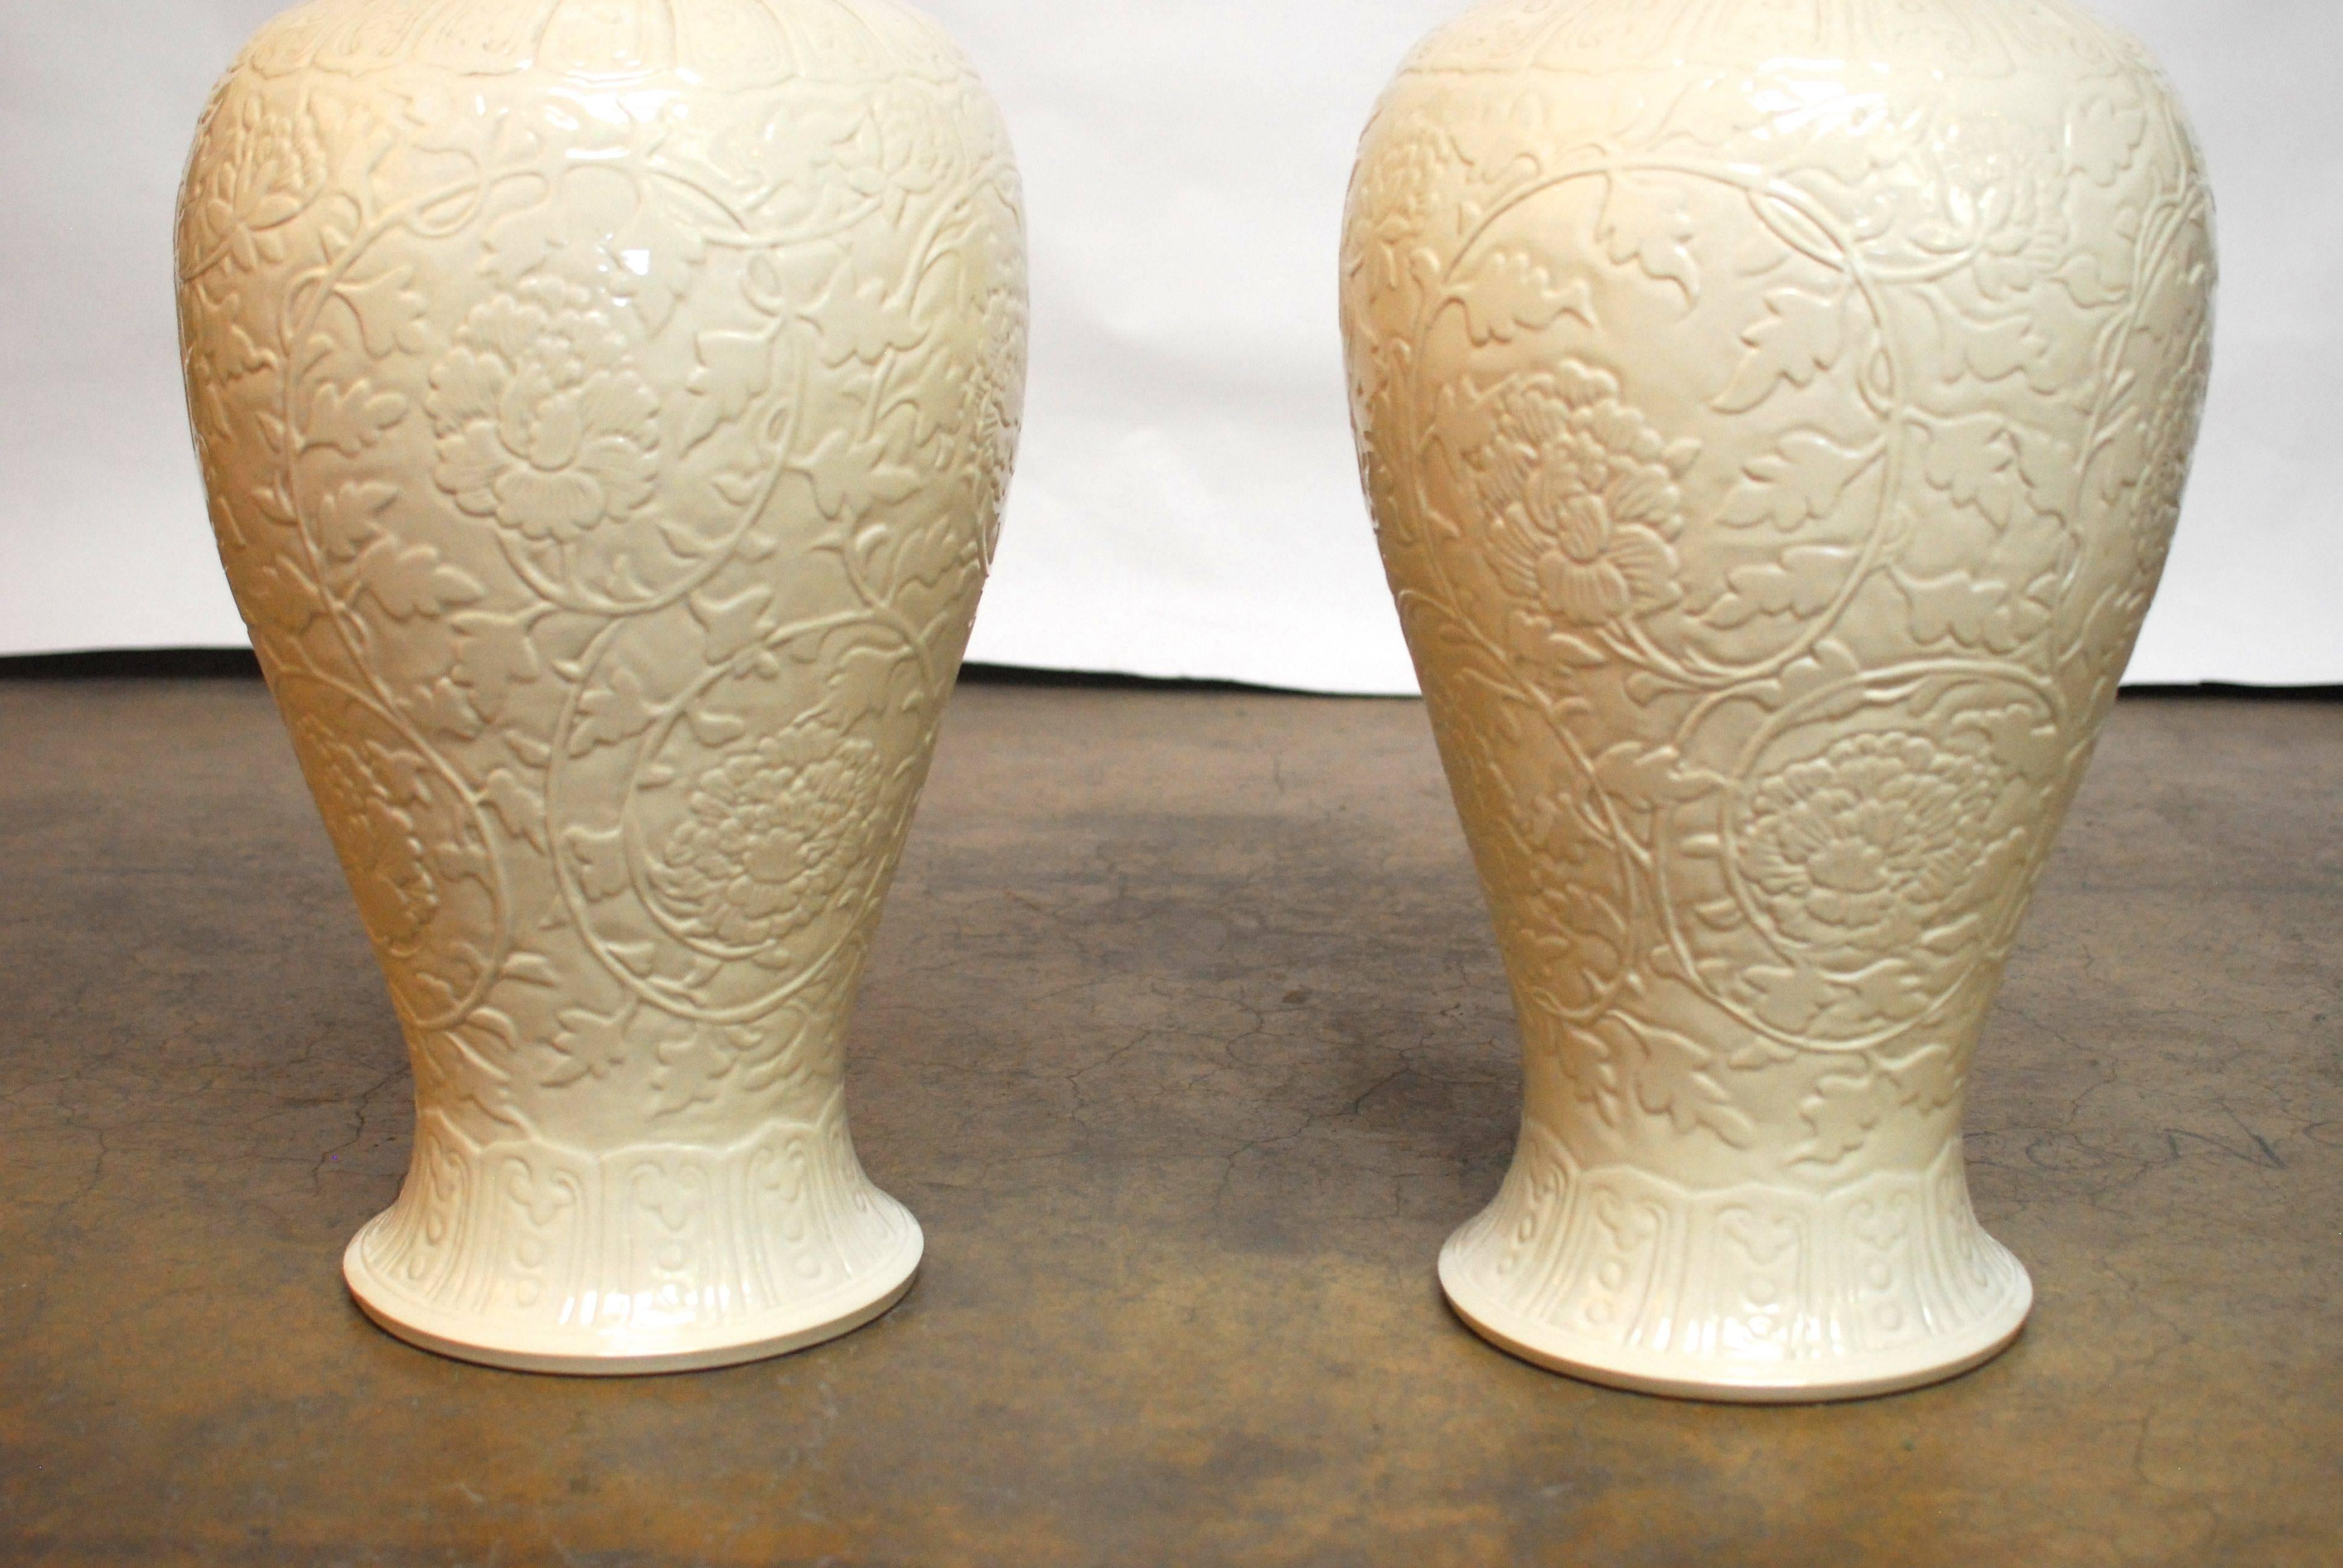 Chinese Export Pair of Chinese Porcelain Blanc De Chine Vases